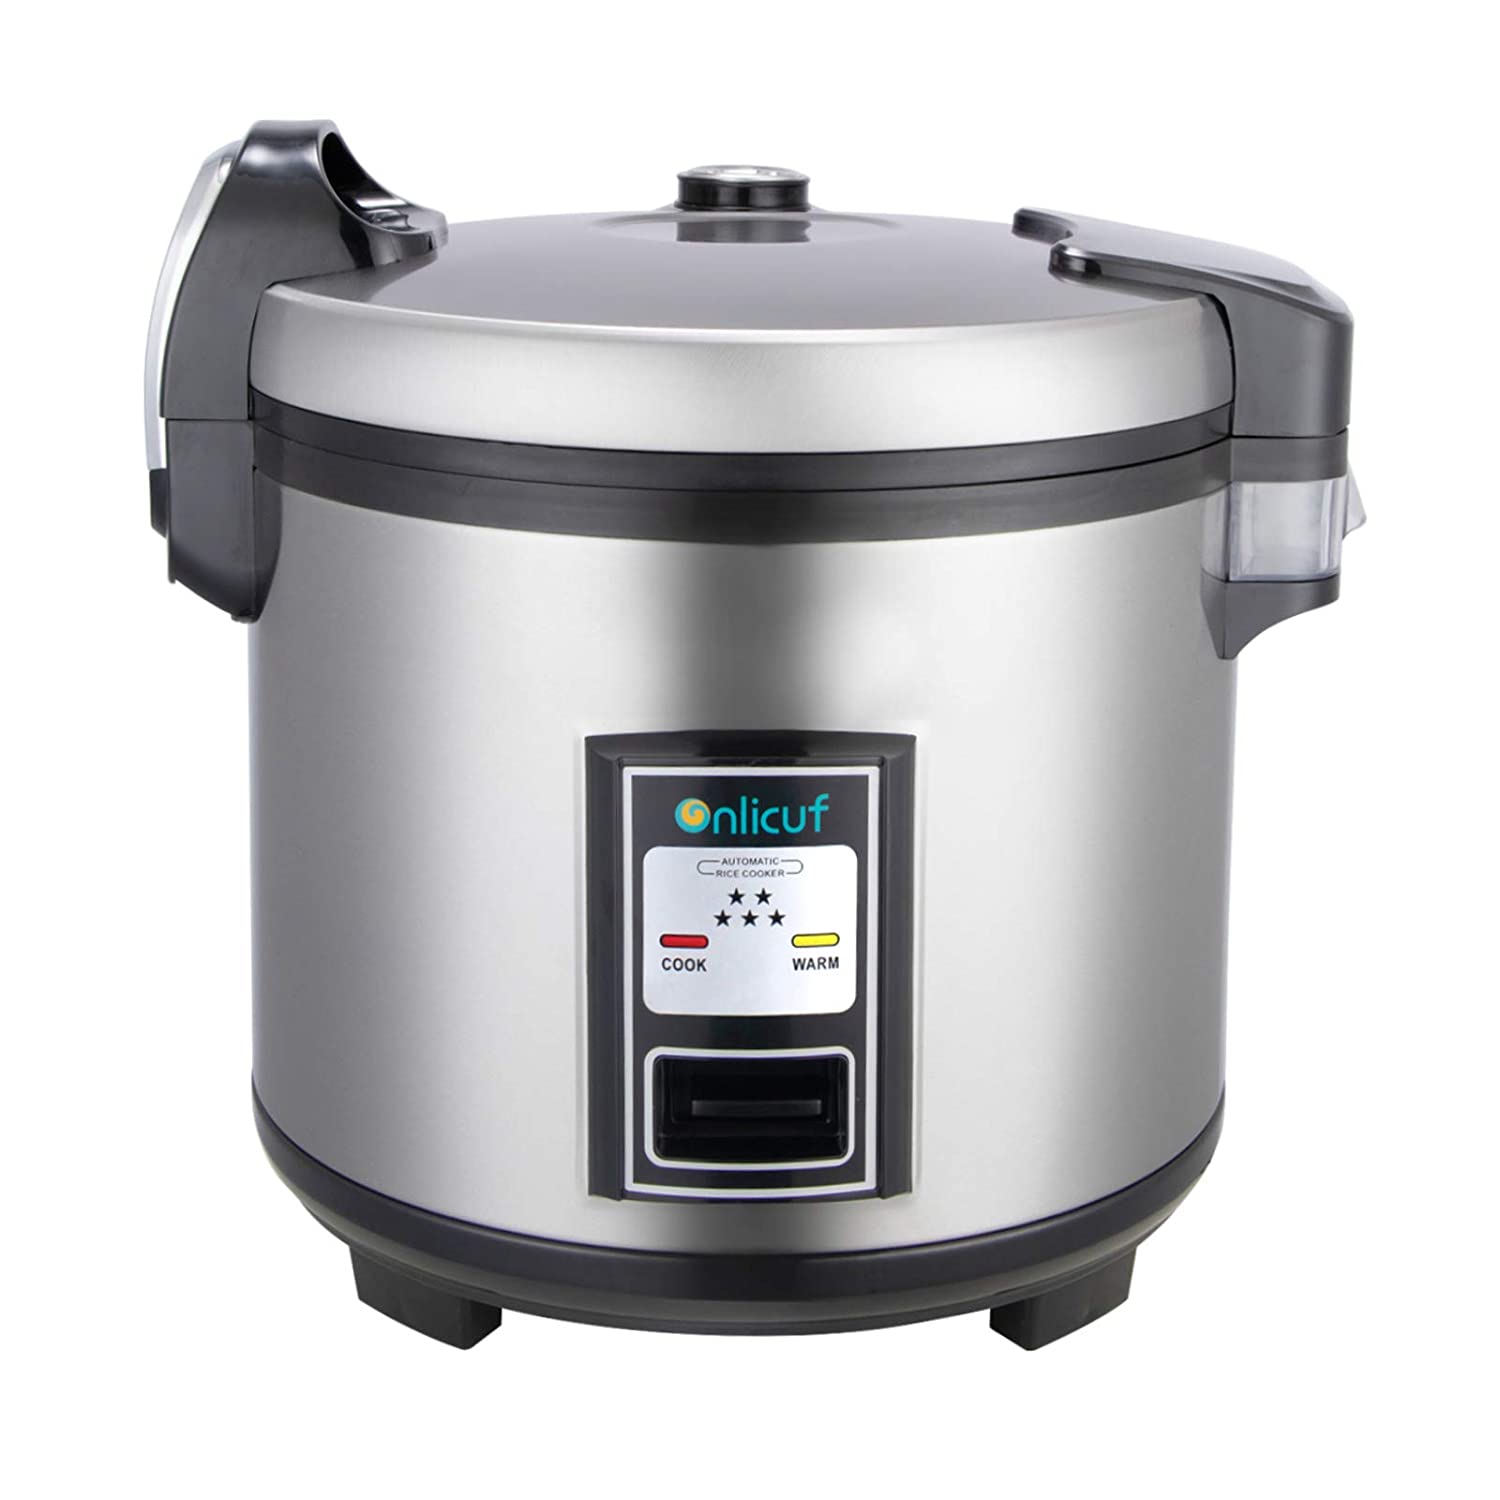 Onlicuf-Commercial-Rice-Cooker-min